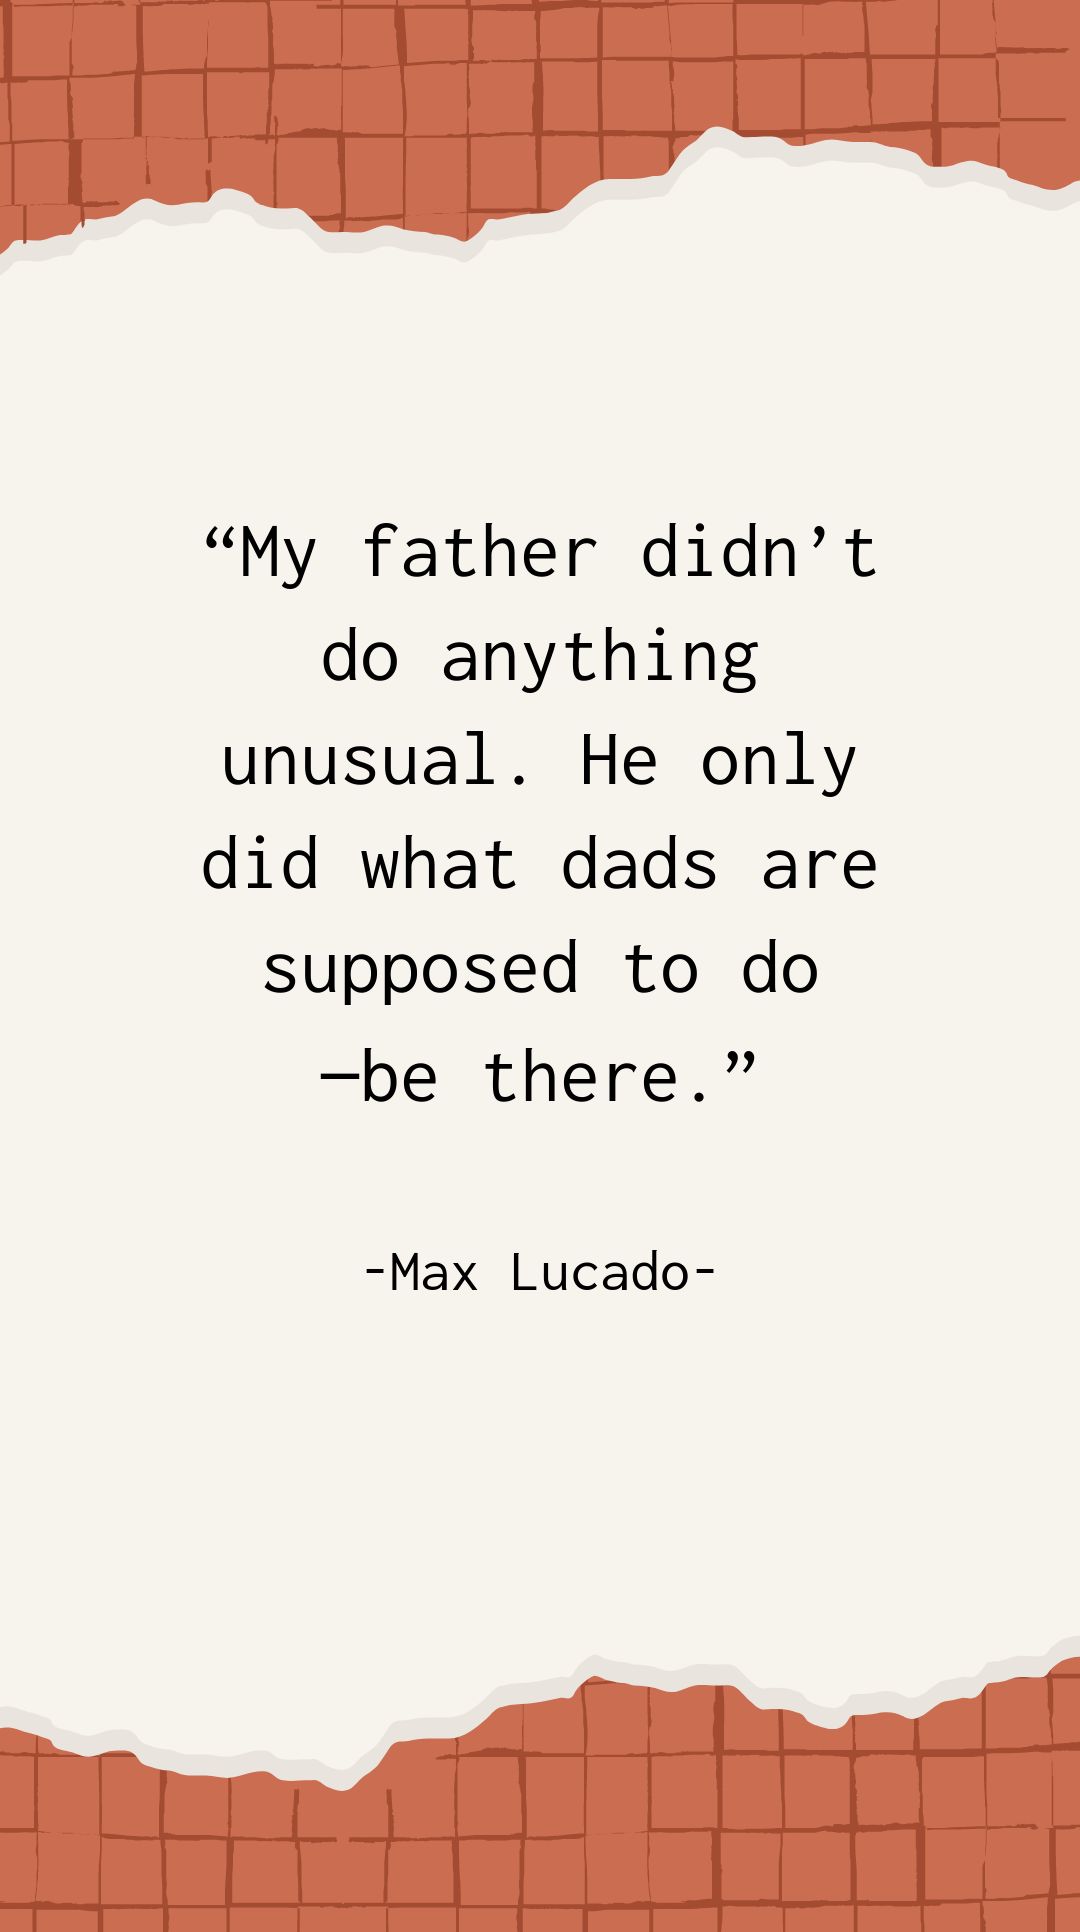 Free Max Lucado - My father didn’t do anything unusual. He only did what dads are supposed to do be there.